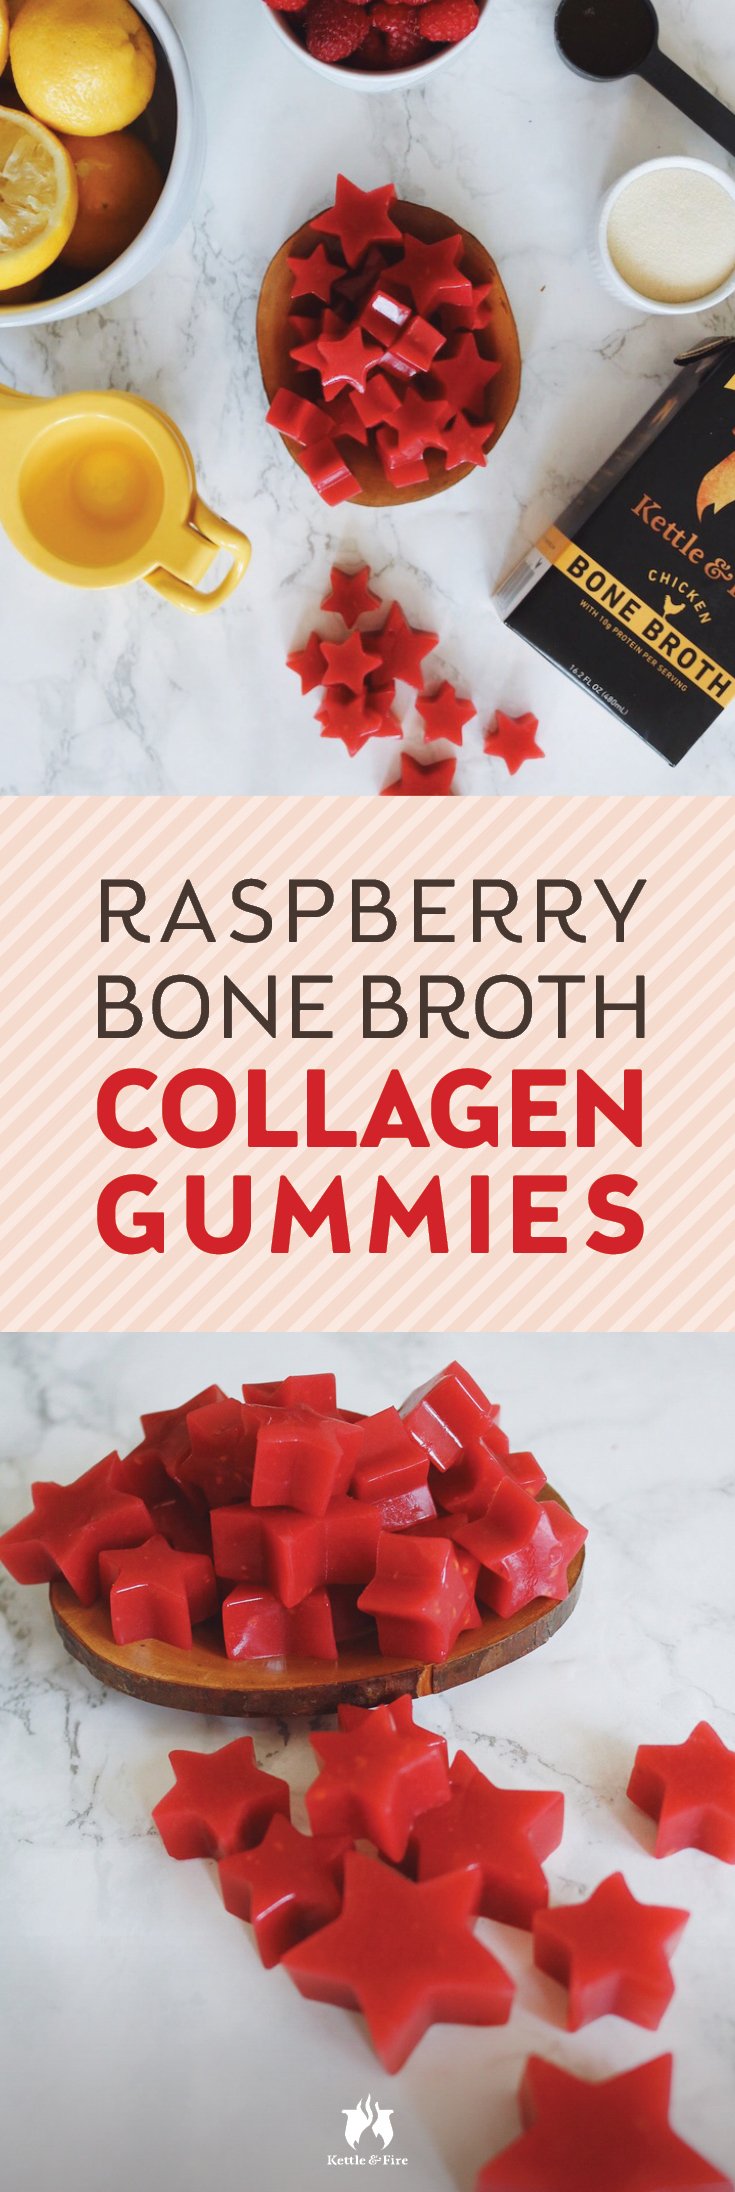 Powered by bone broth and sweetened with only natural sugars, these little collagen gummies are a cinch to make pack a nutritious punch with each bite.